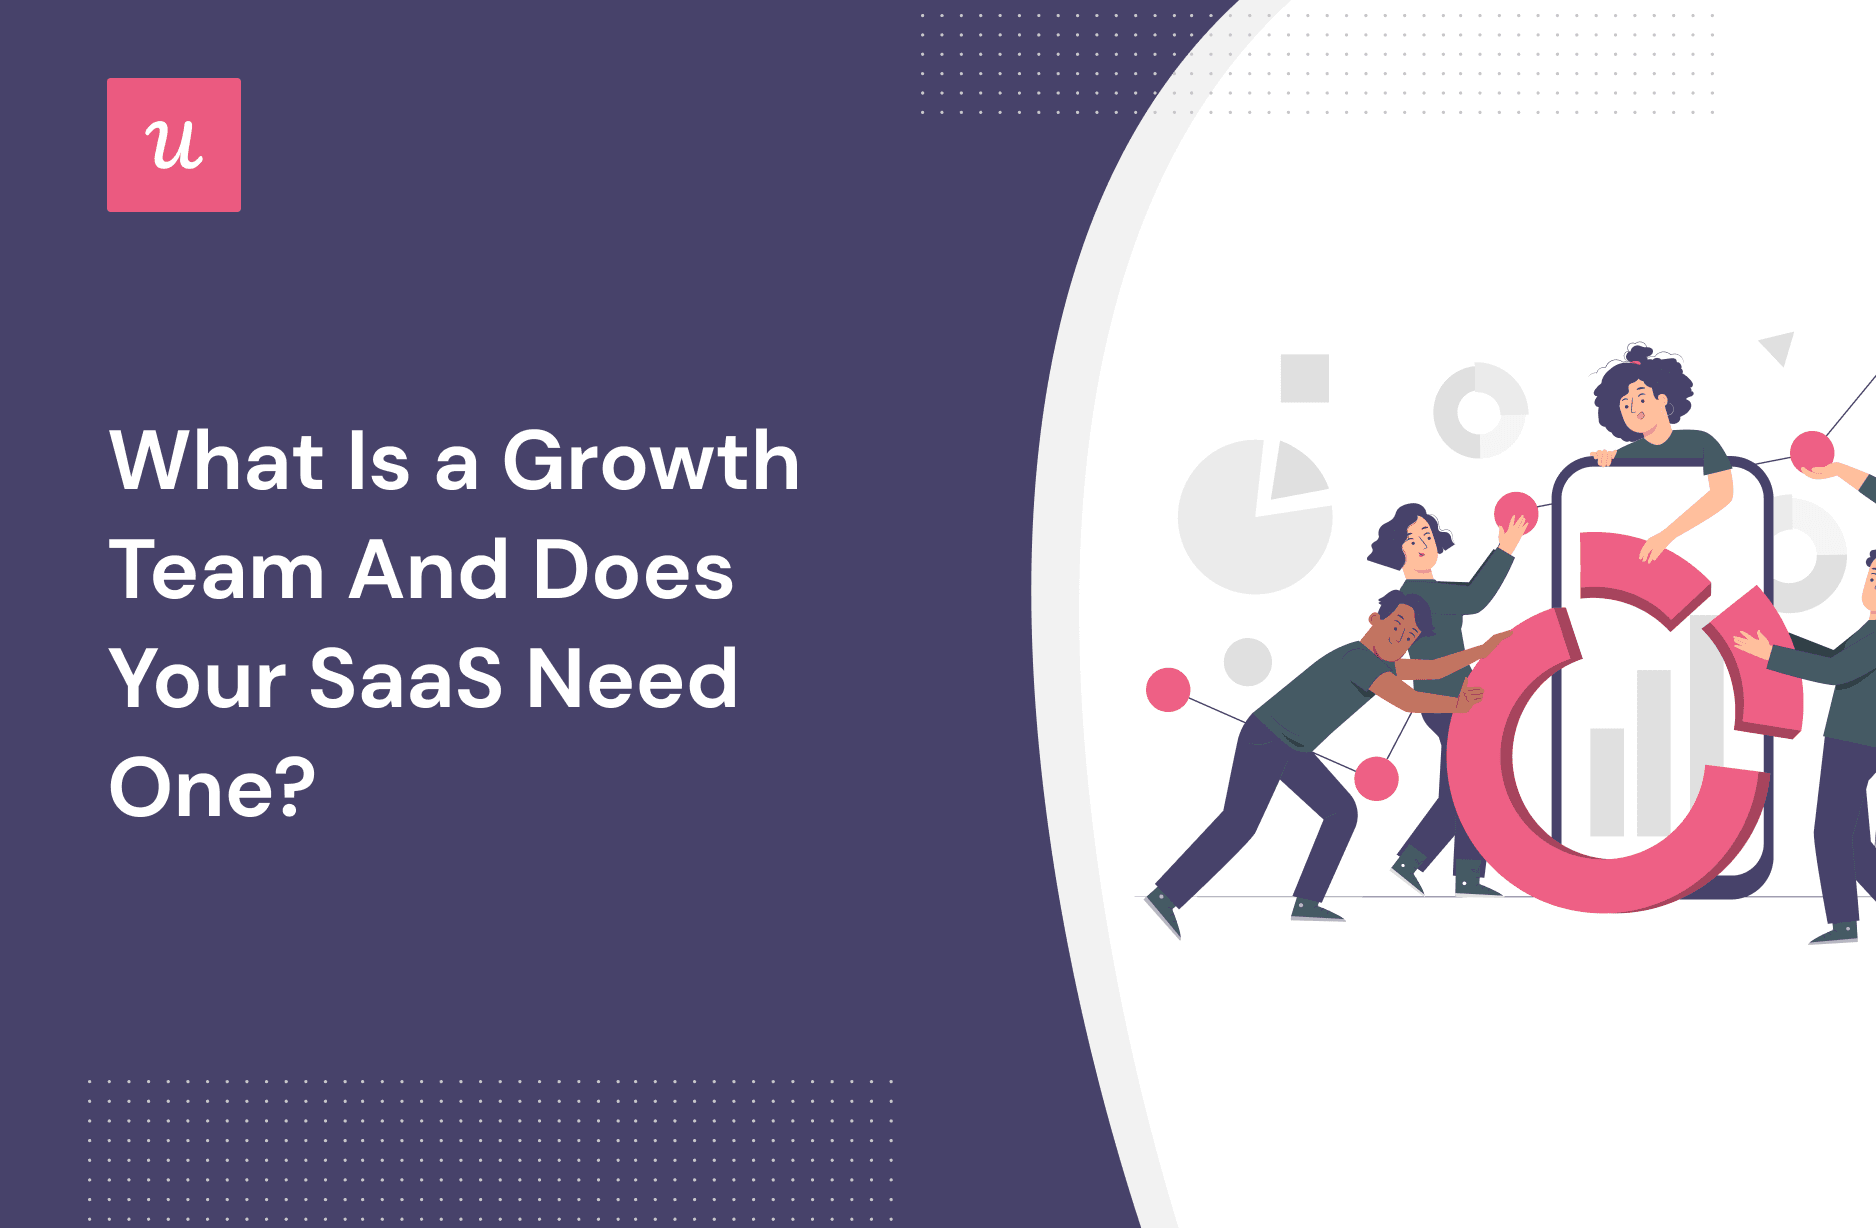 What Is a Growth Team And Does Your SaaS Need One? cover